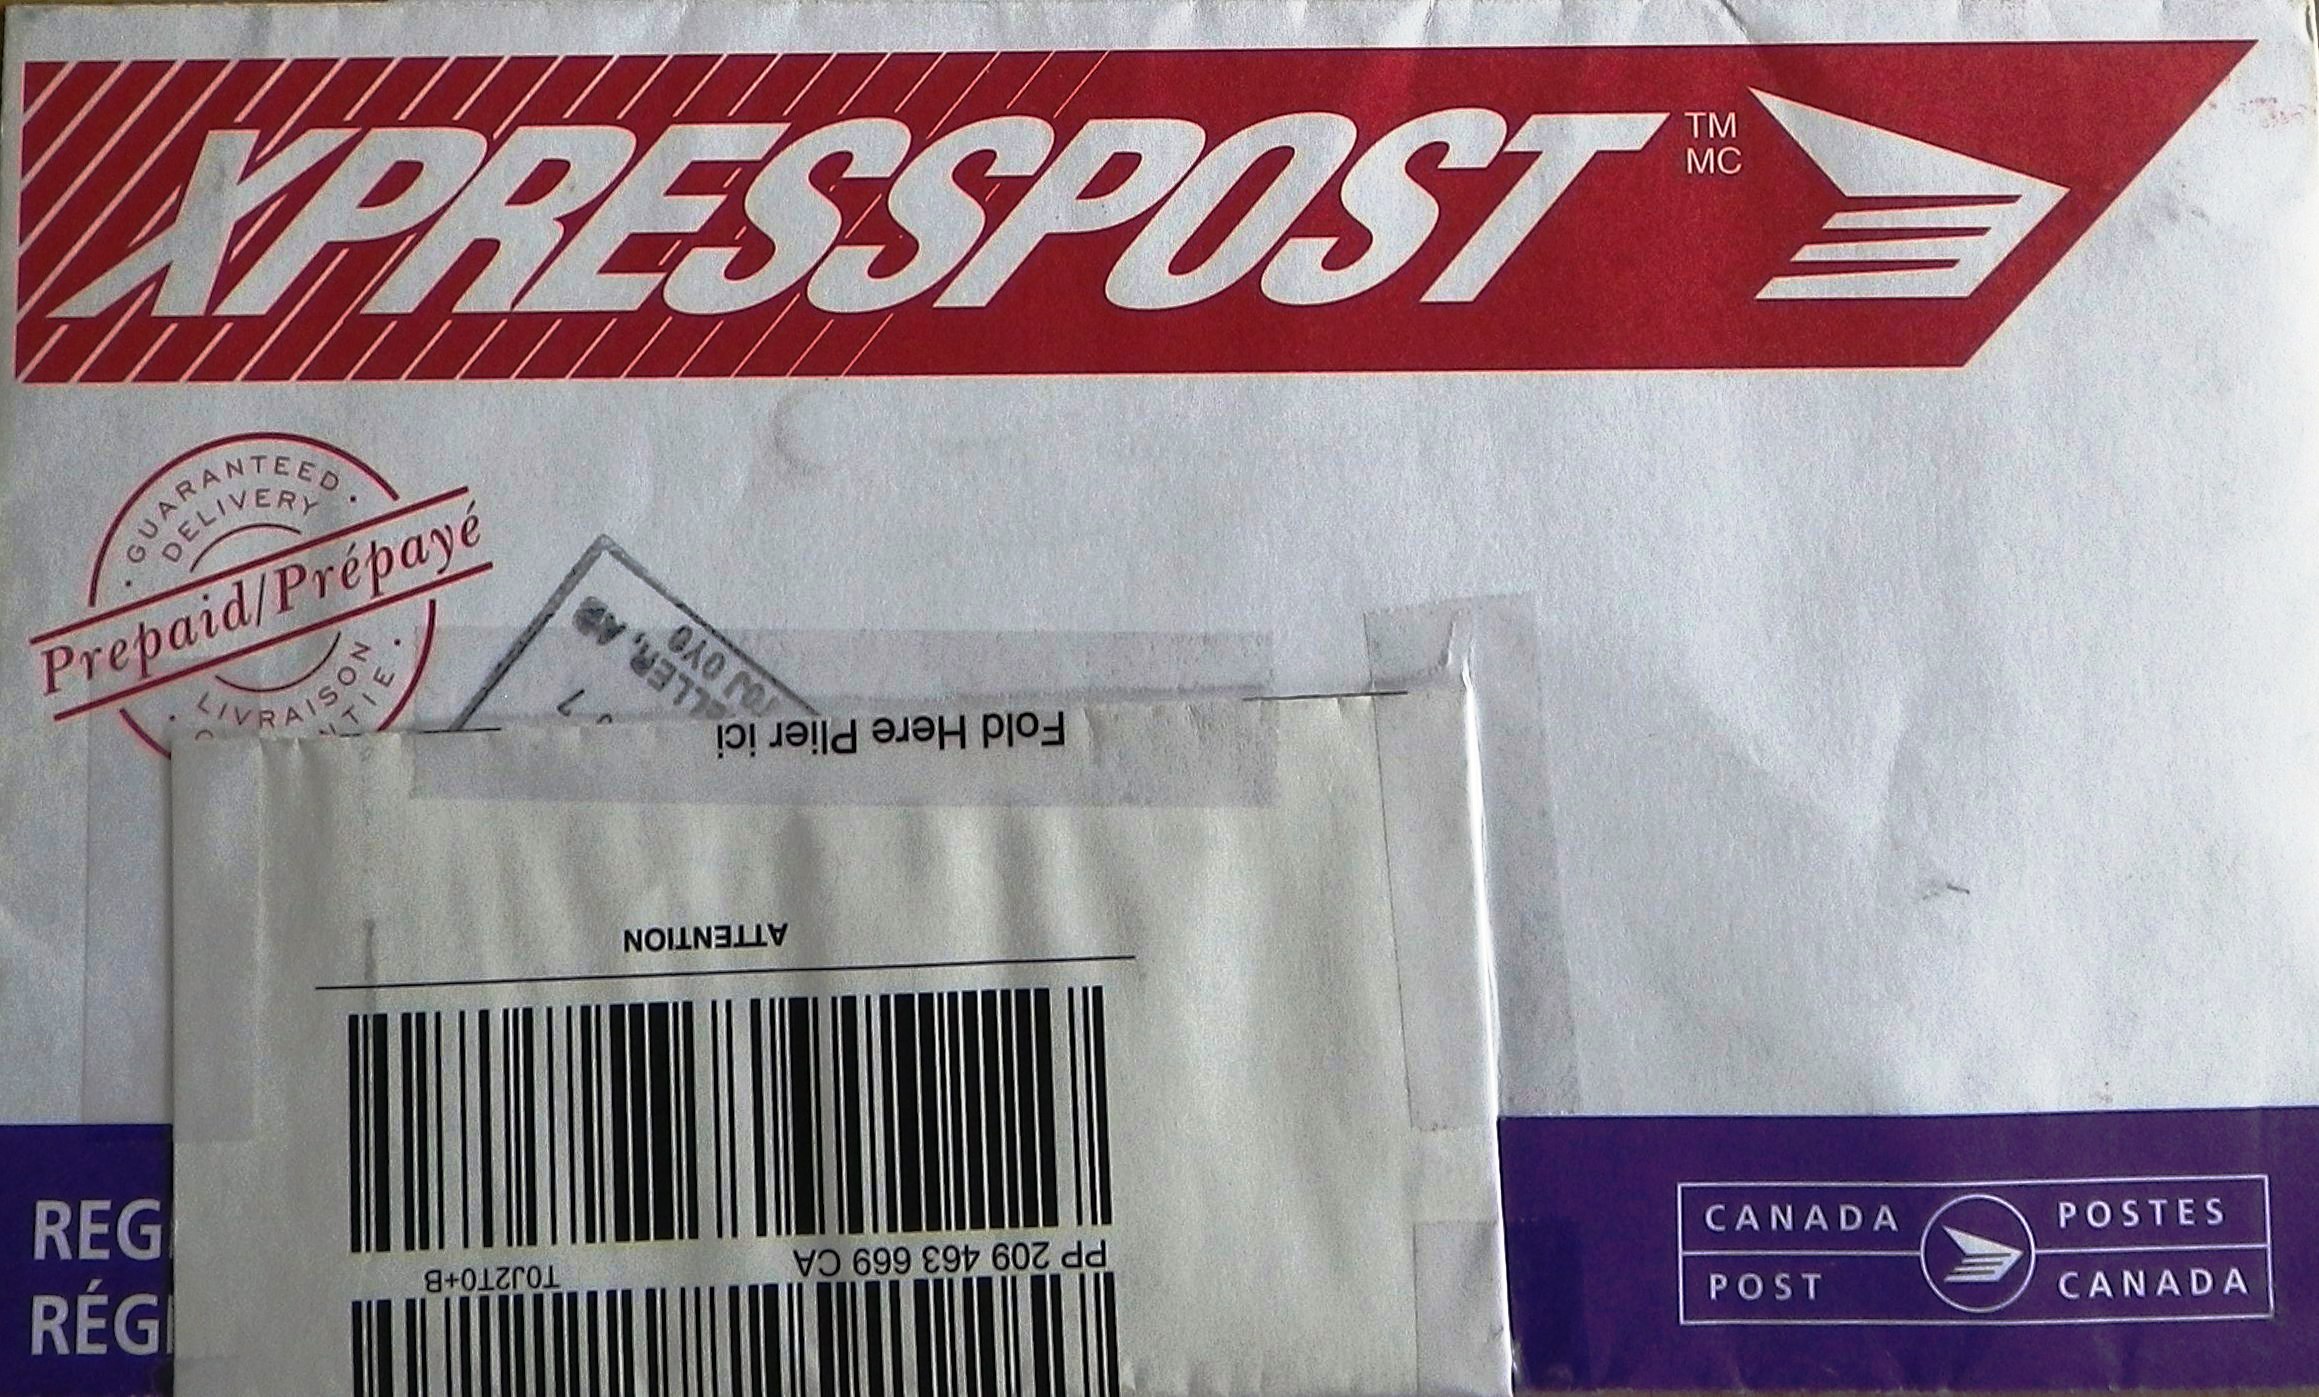 2005 12 front XPRESSPOST stamped refused by addressee contains (EUB) Ernst letter to EUB asking clarication re banishment